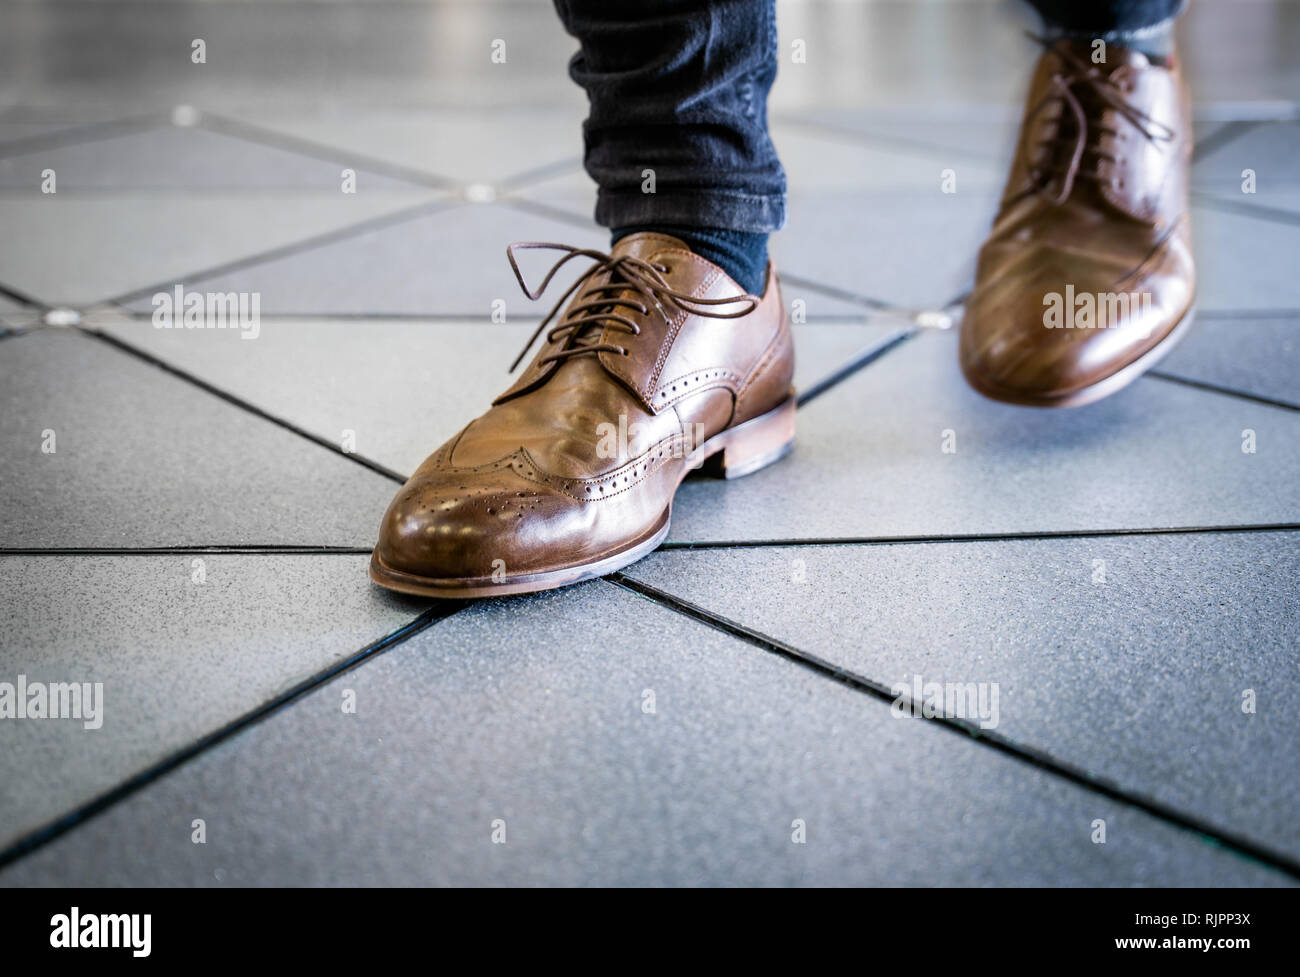 Feet in pair of brogues on tiled flooring Stock Photo